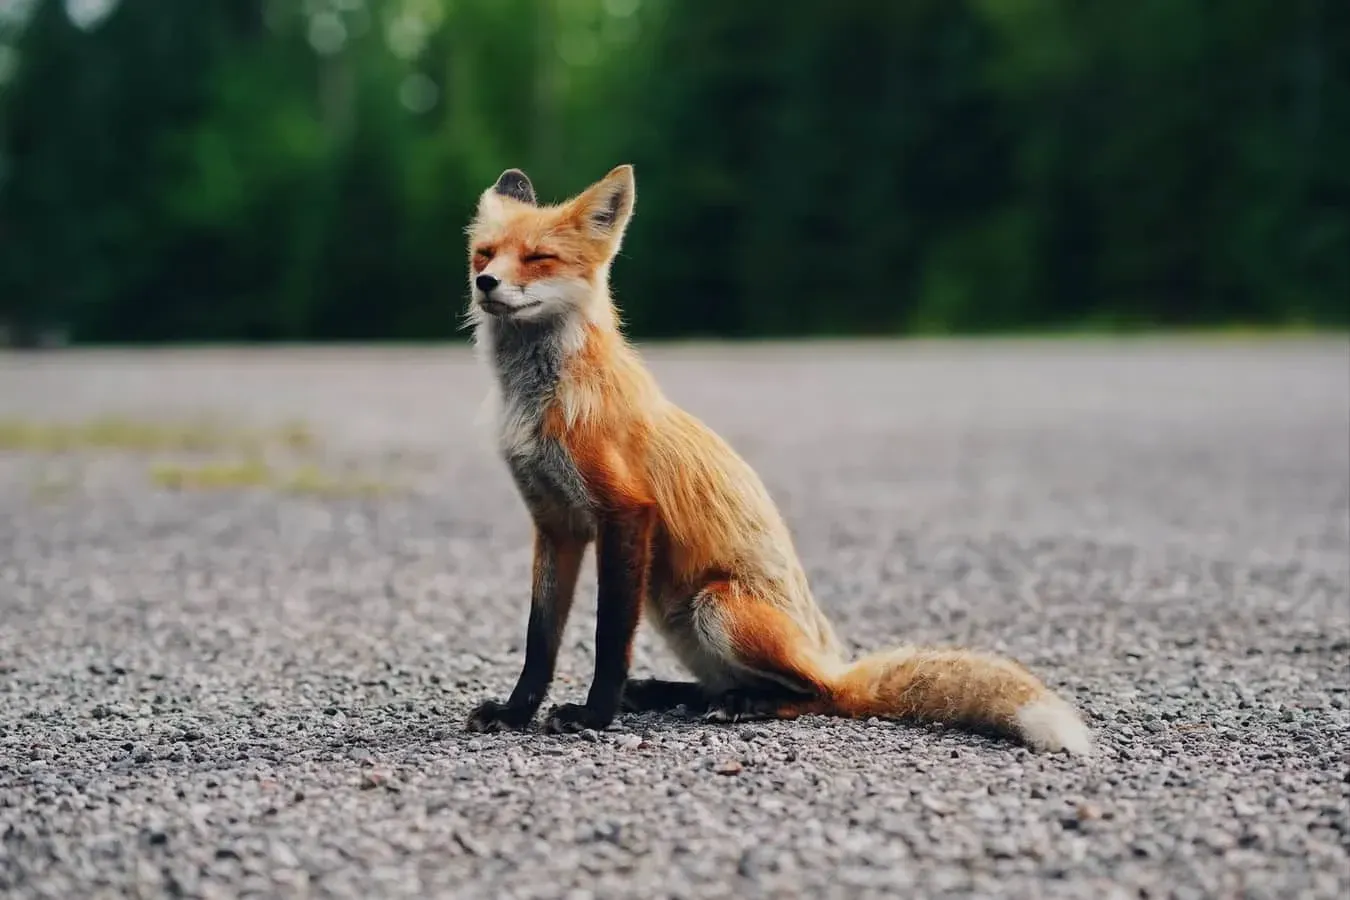 Foxes have made many features in pop culture, including The Little Prince and 'Fantastic Mr Fox